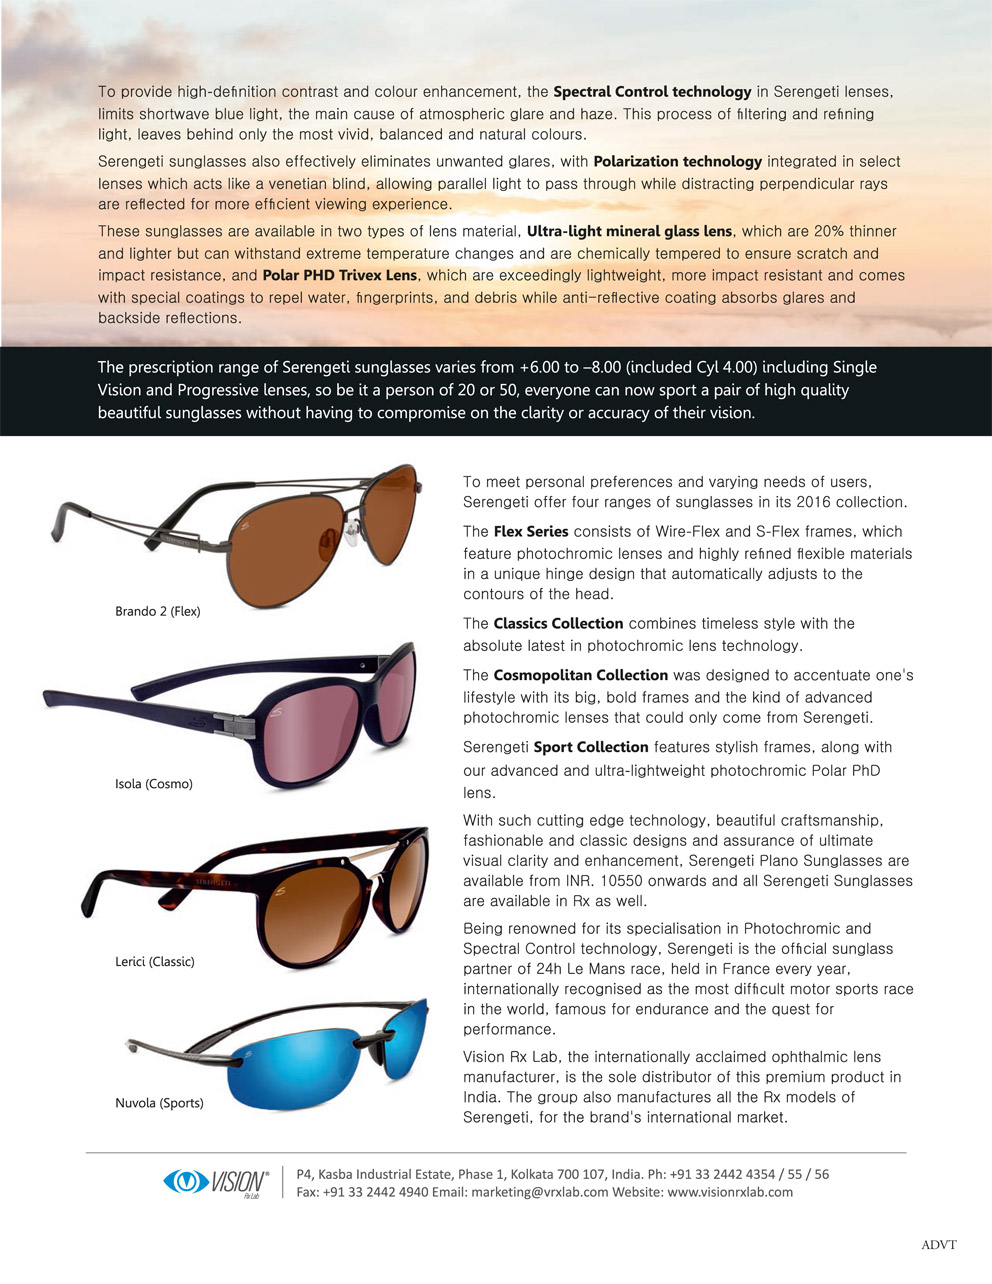 The Indian Optician page 2/6